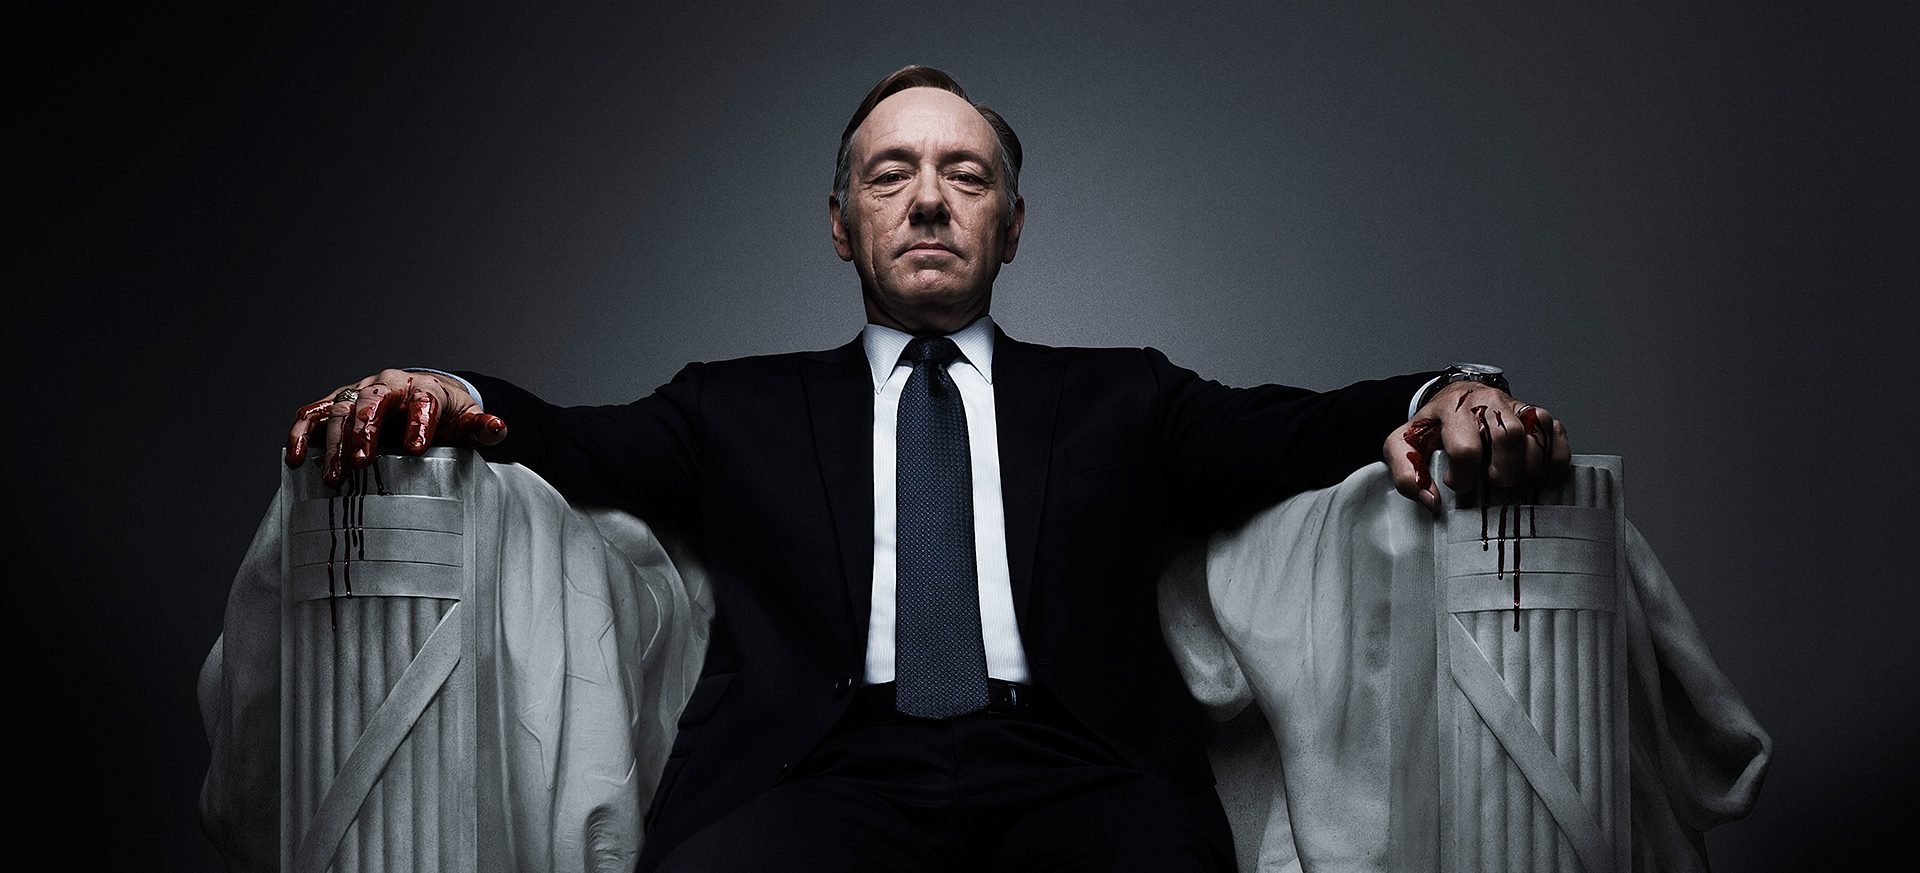 Rumor: House of Cards’ Season 4 Could Be its Last